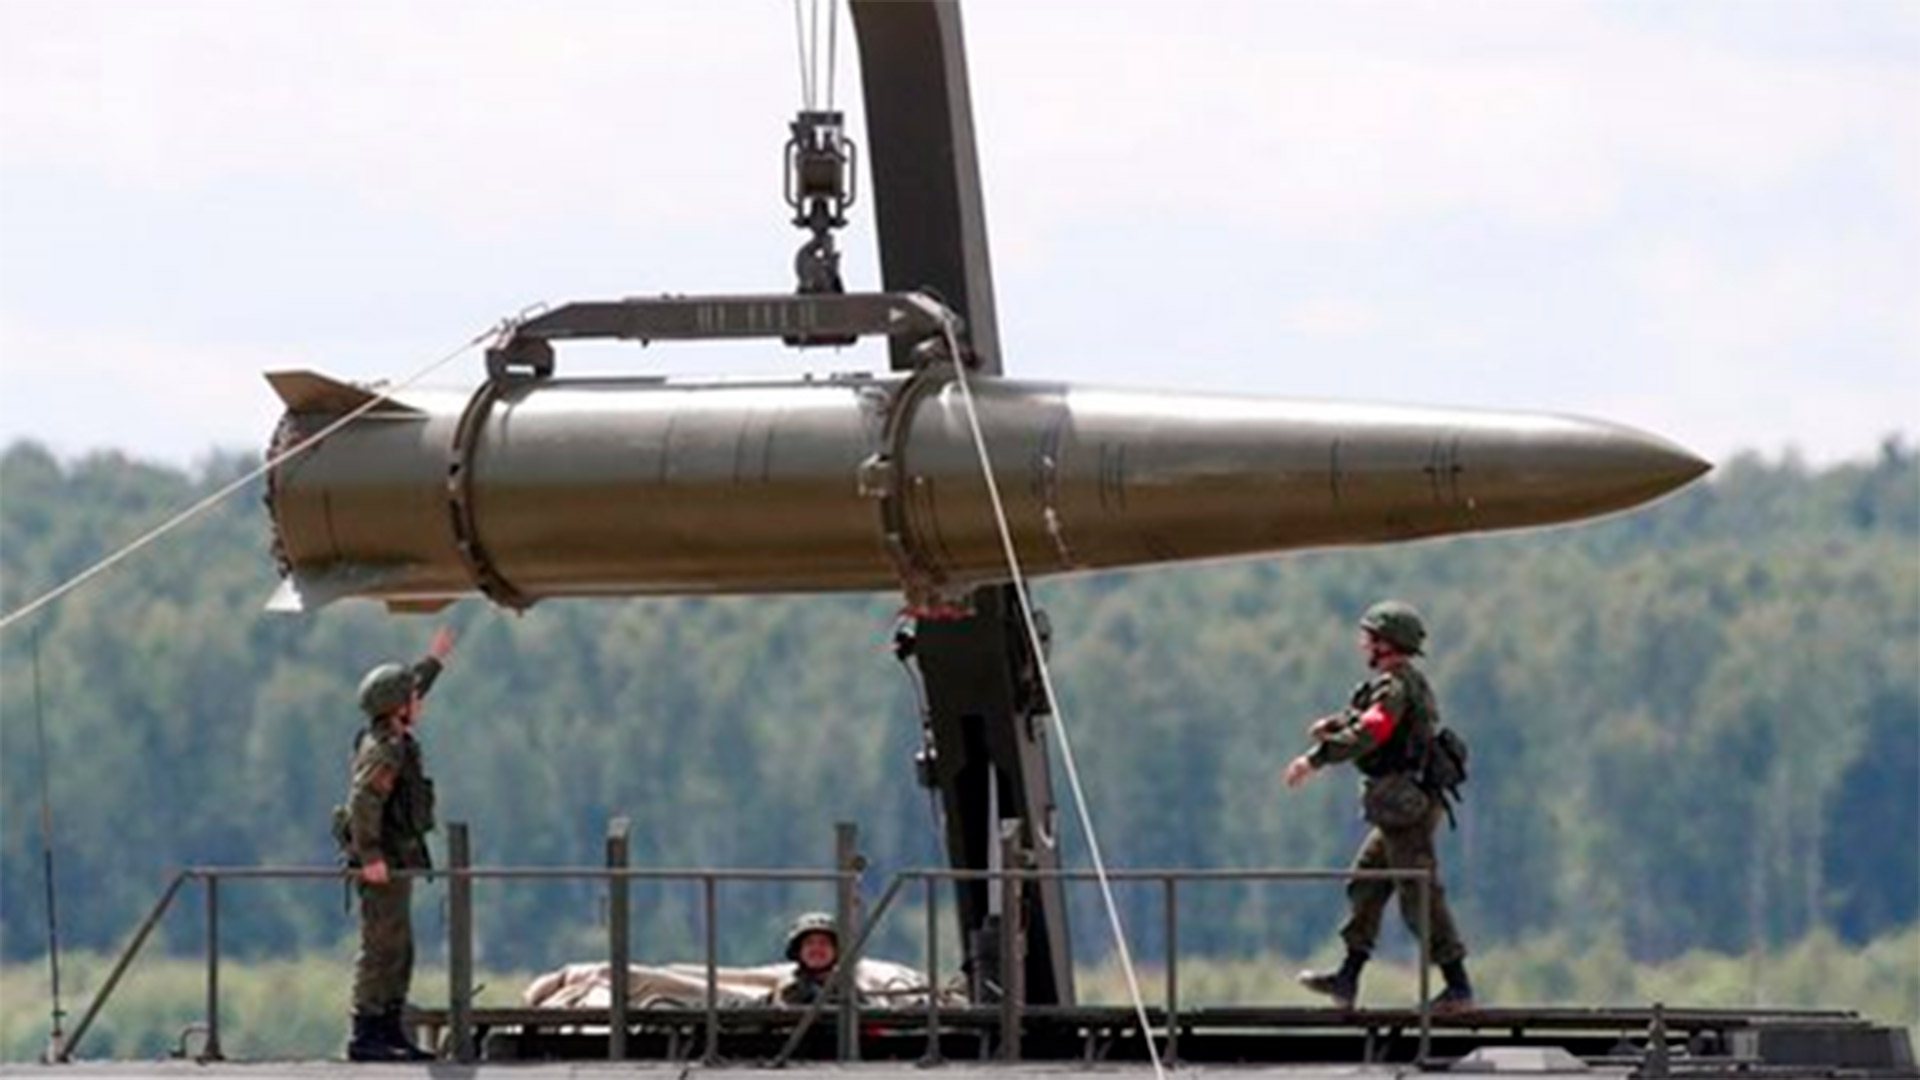 Xander tactical missile used by Russia in Ukraine